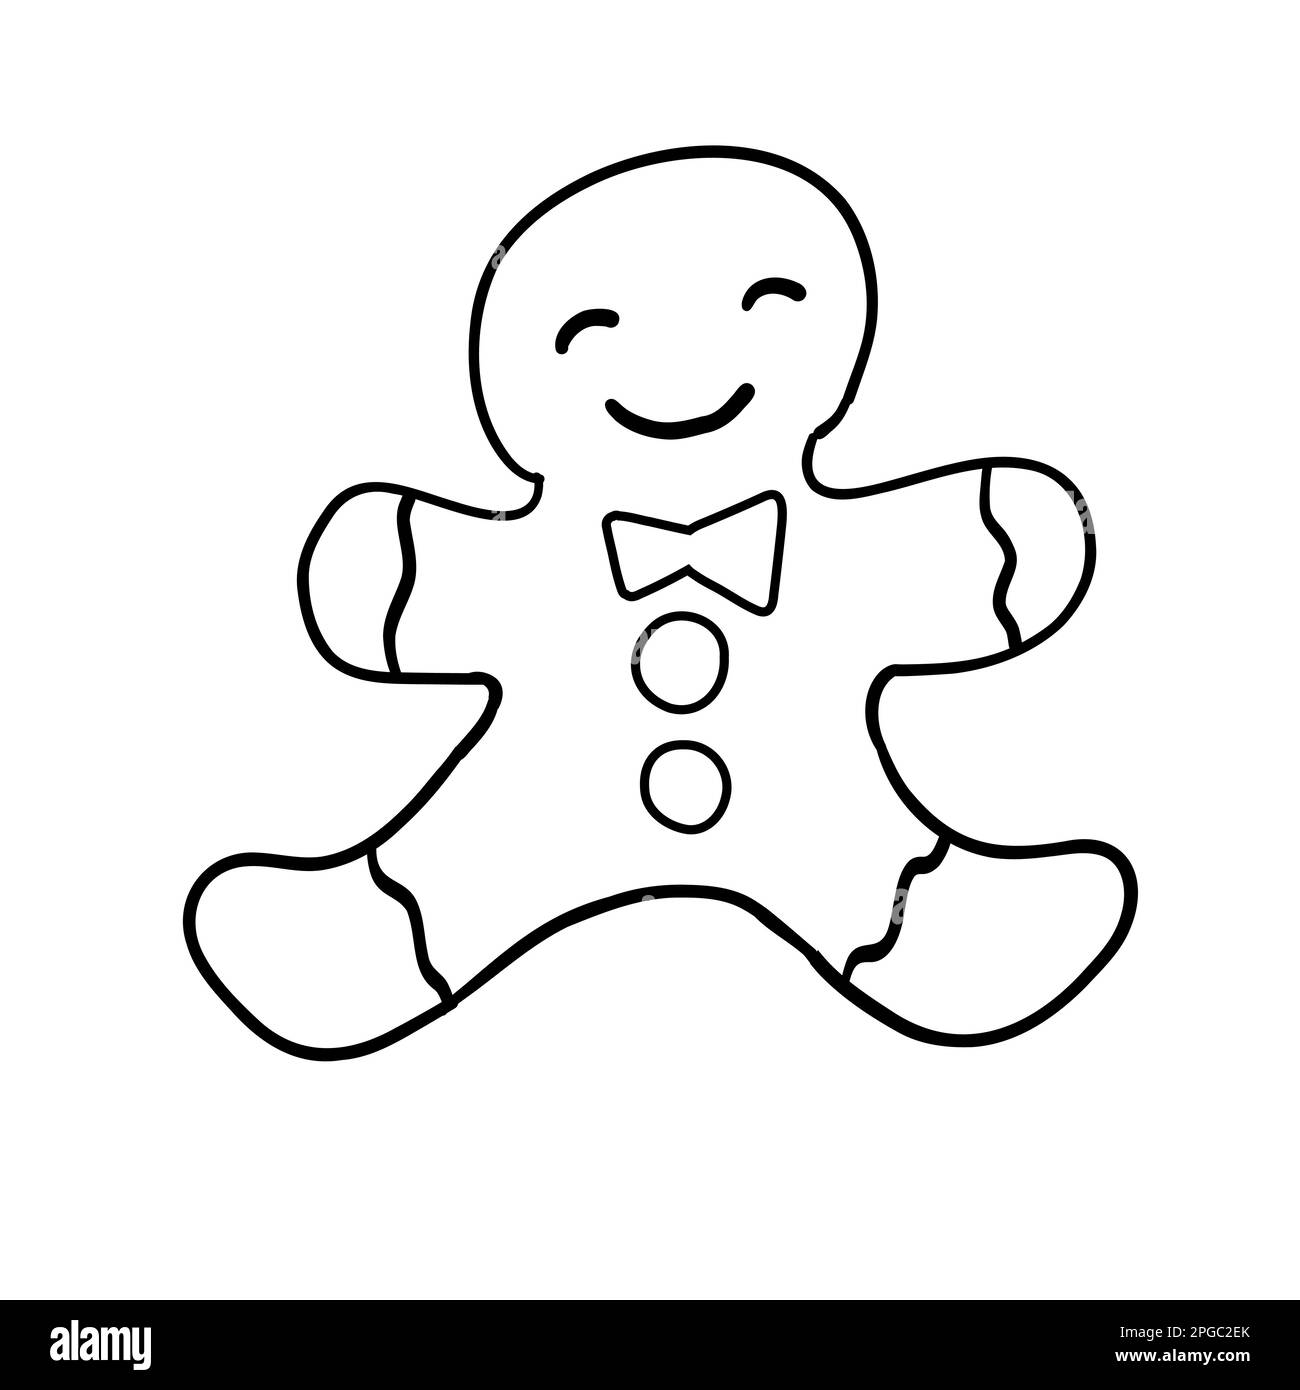 Gingerbread man in outline doodle style. Christmas and New Year cookie. Vector illustration isolated on white background. Stock Vector